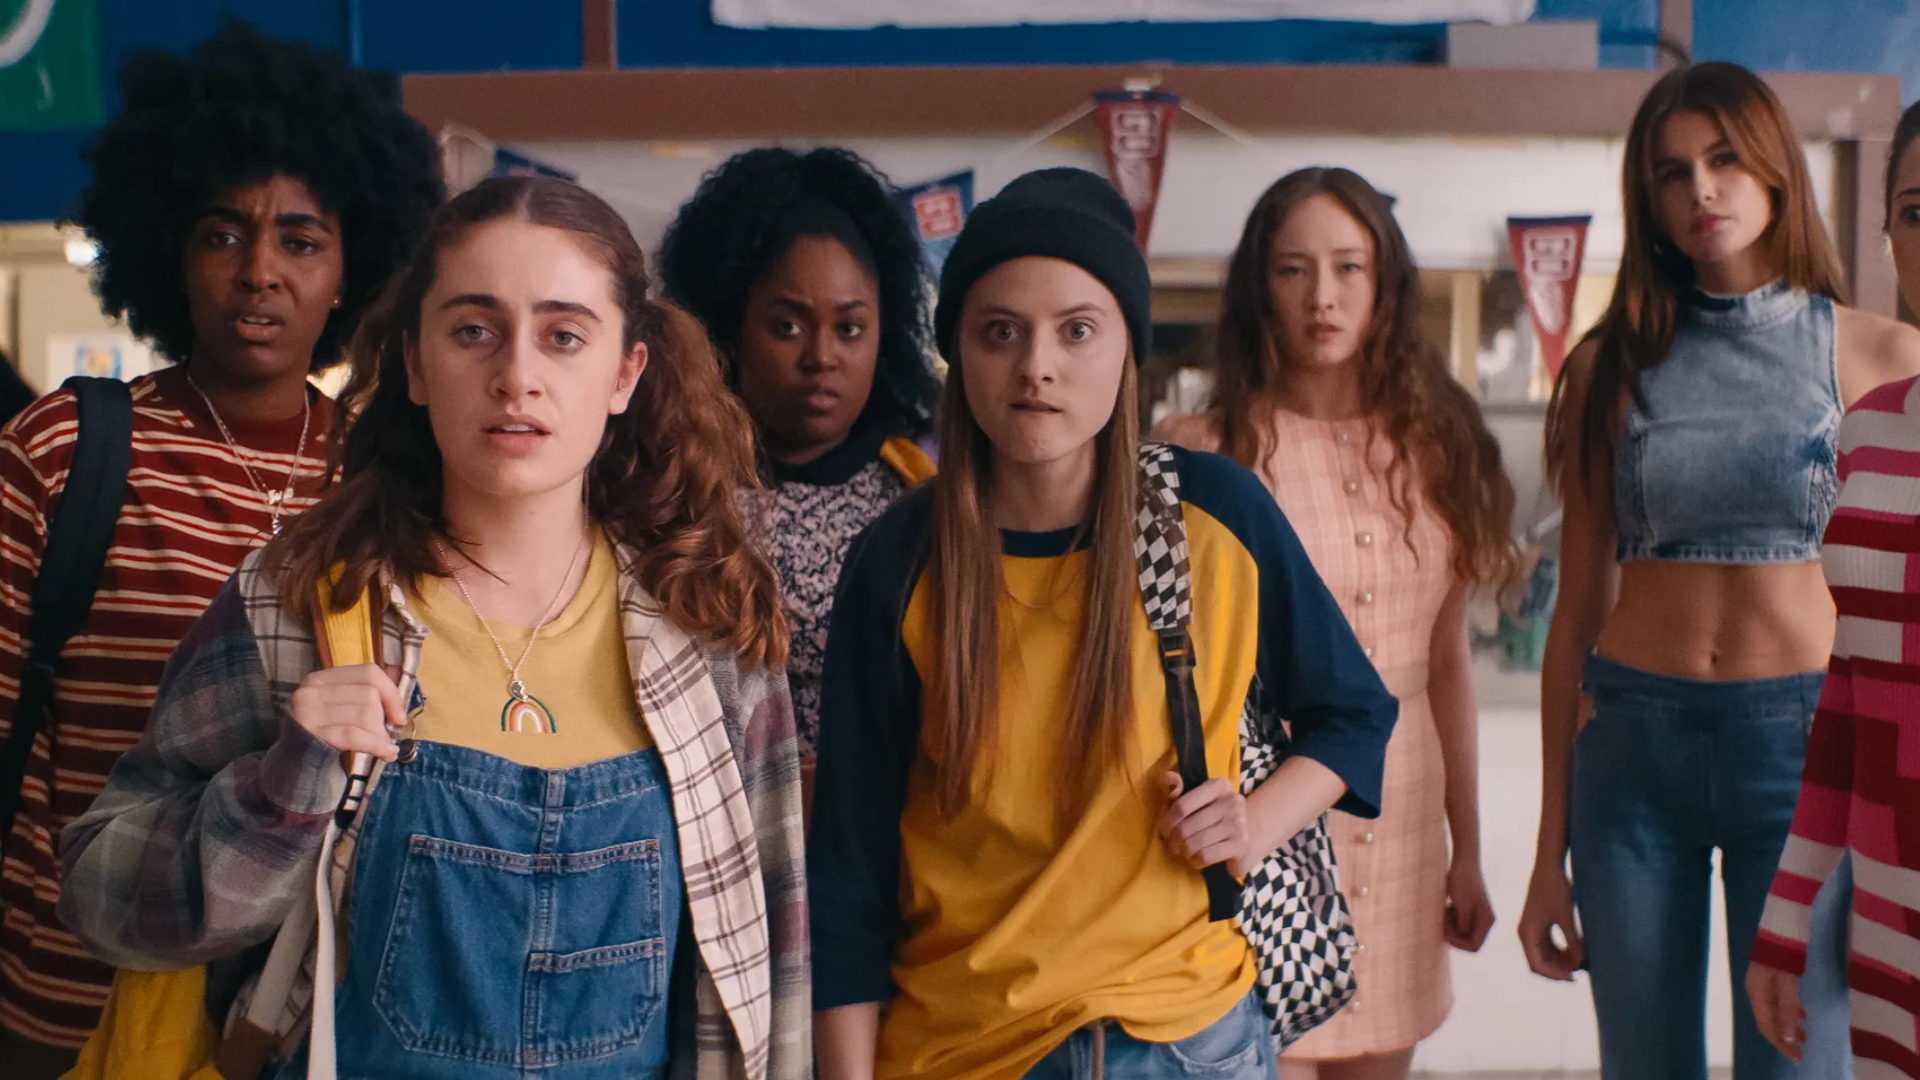 The ensemble cast of Bottoms, a group of high school girls, look towards the camera with looks of confusion and disgust.